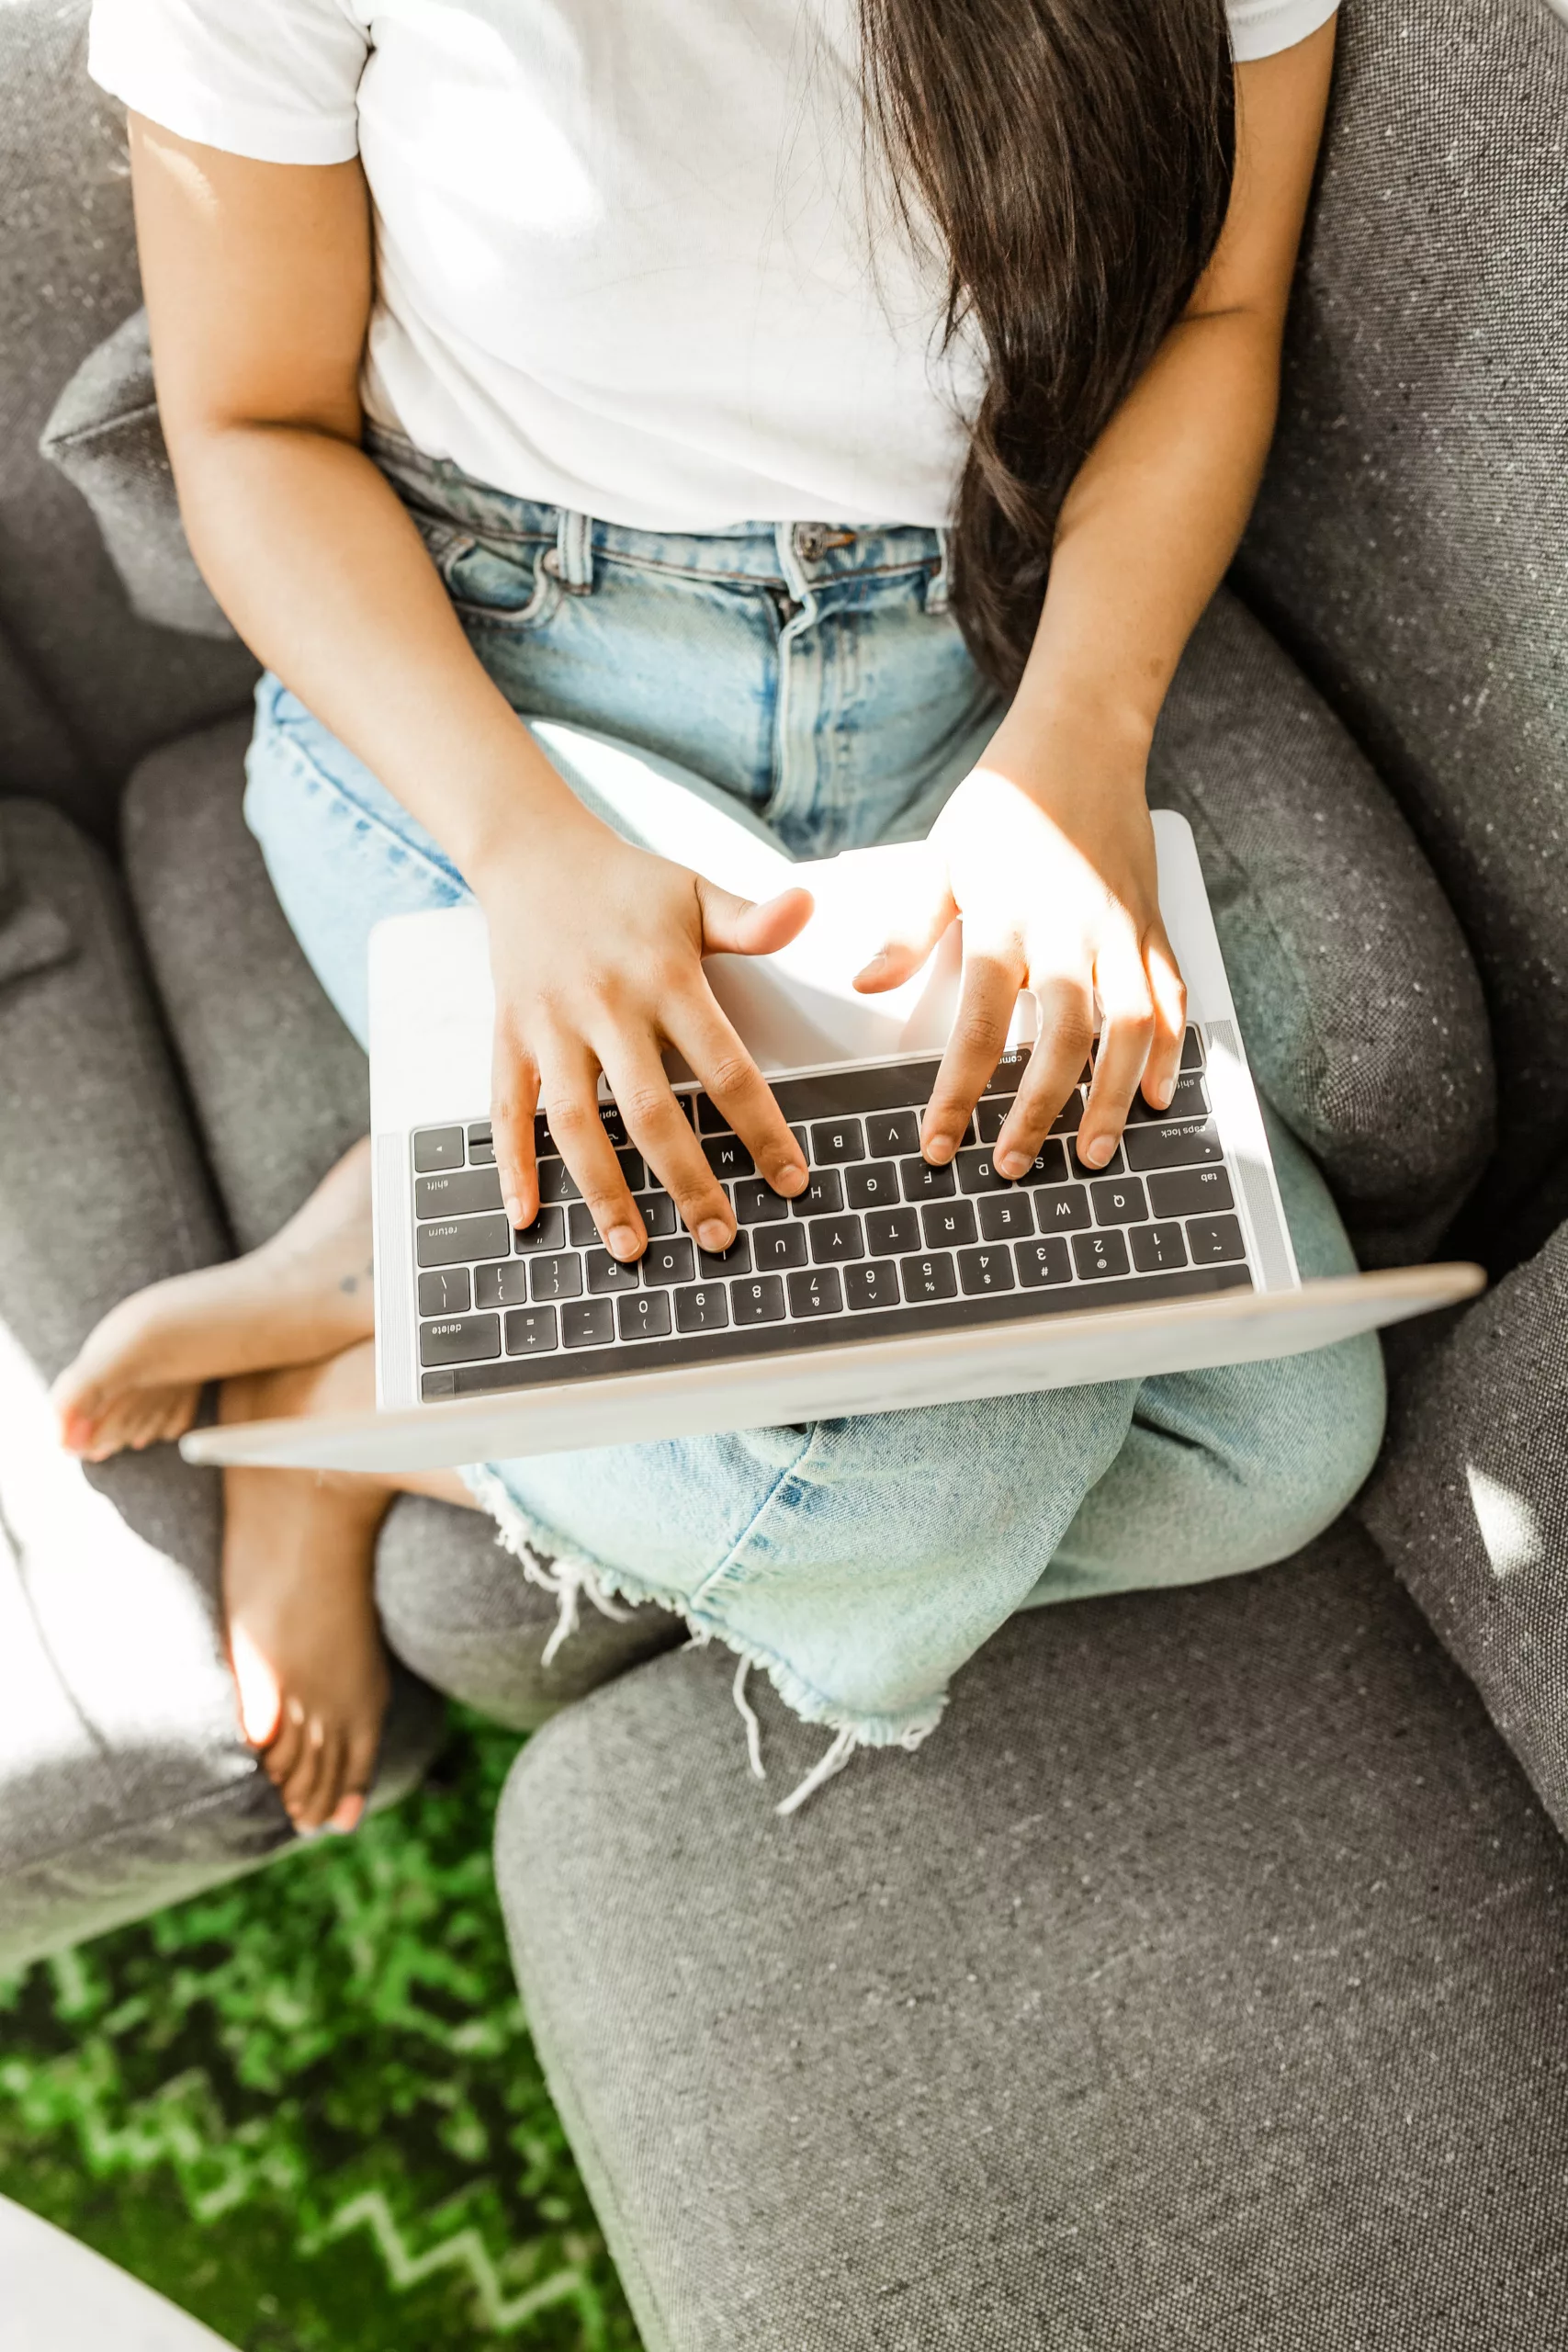 Woman on the couch with blue jeans and a white shirt using her macbook to type.